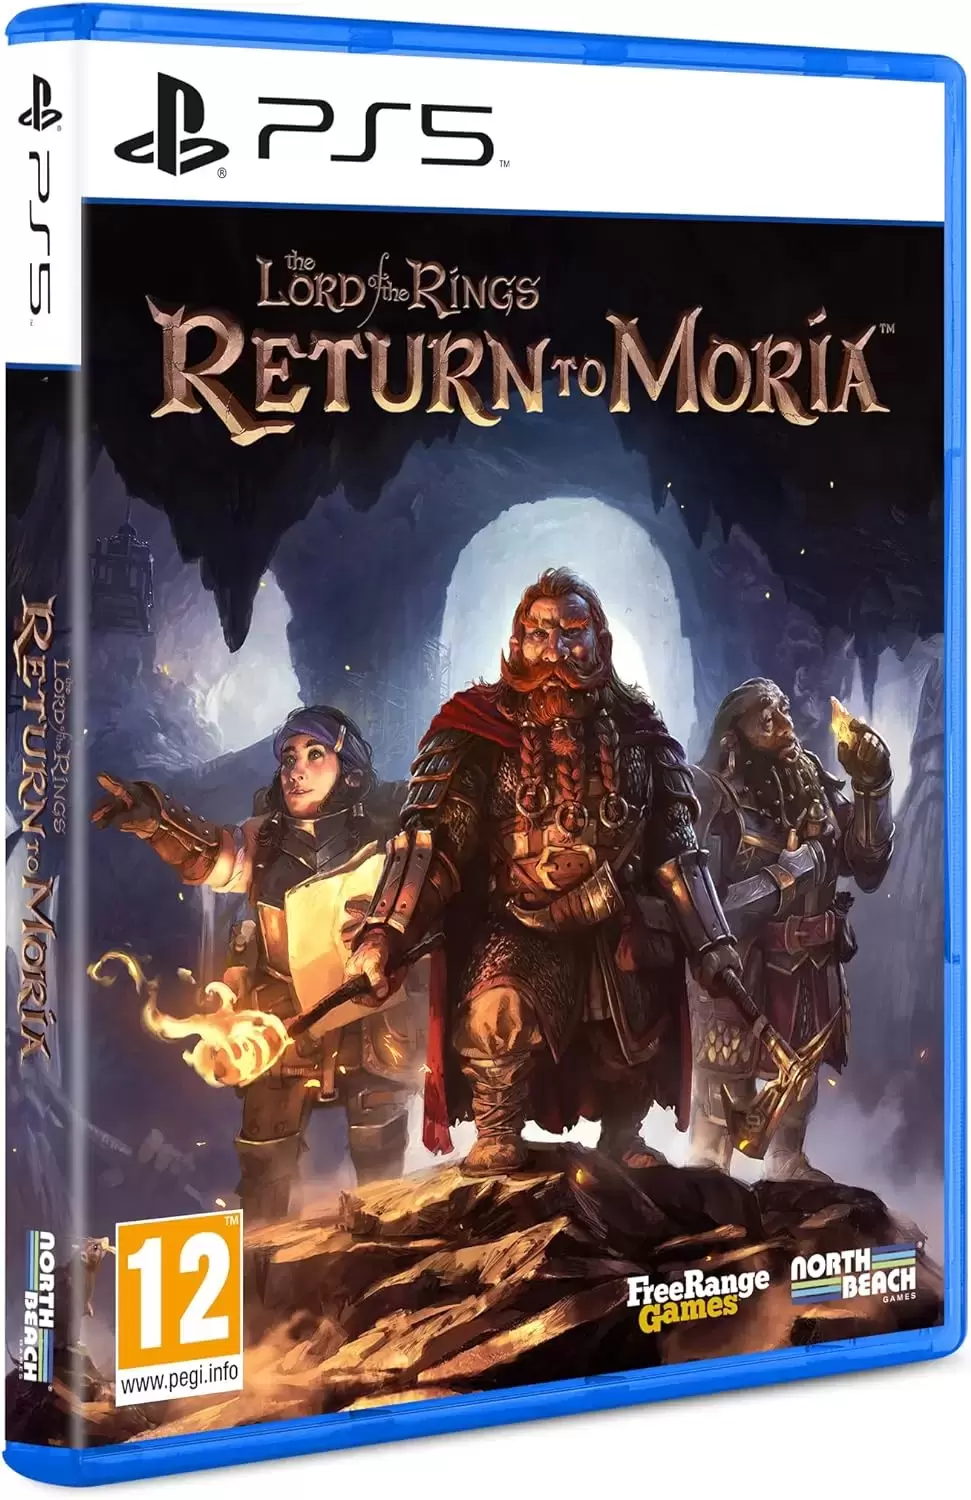 PS5 Games - The Lord of the Rings - Return To Moria